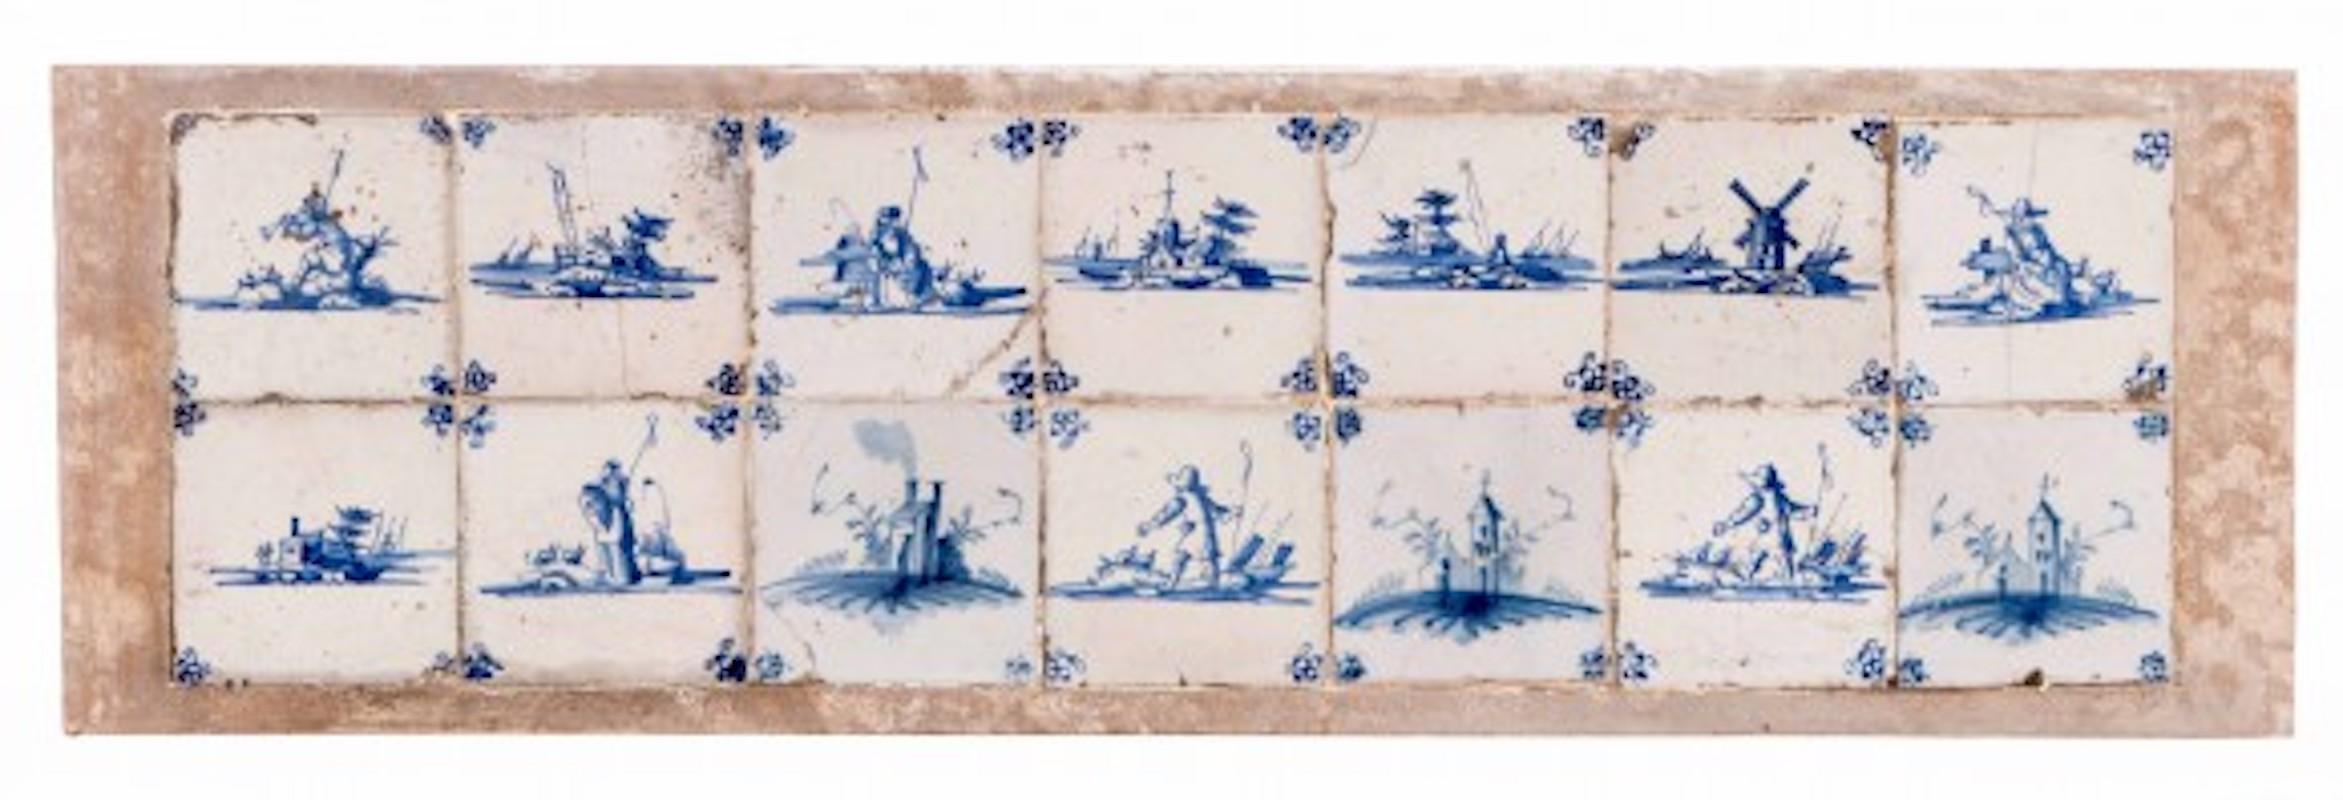 14 blue and white, early 18th century Dutch, delftware tiles, with characteristic landscape scenes mounted in a reconstituted stone plaque.
                